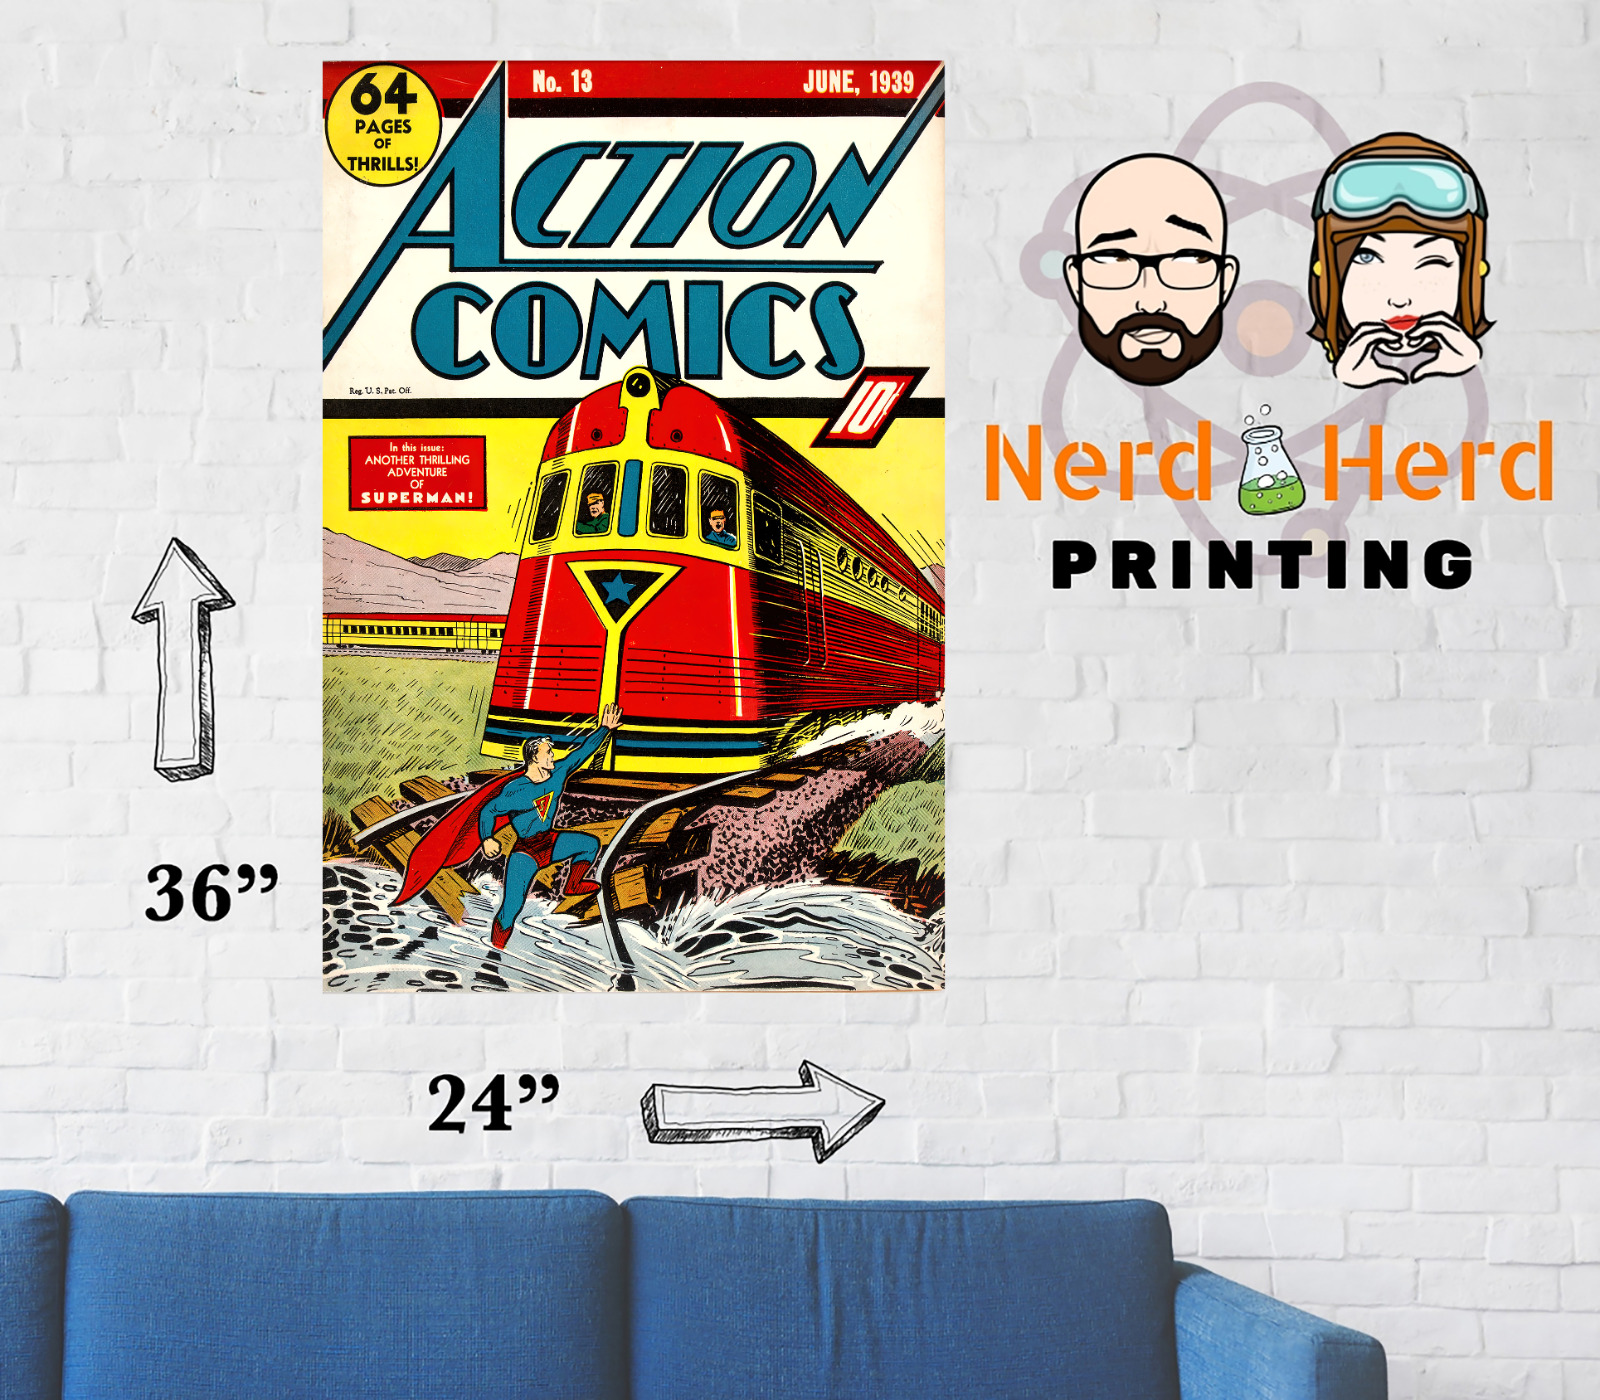 Action Comics #13 Comic Cover Wall Poster Multiple Sizes 11x17-24x36